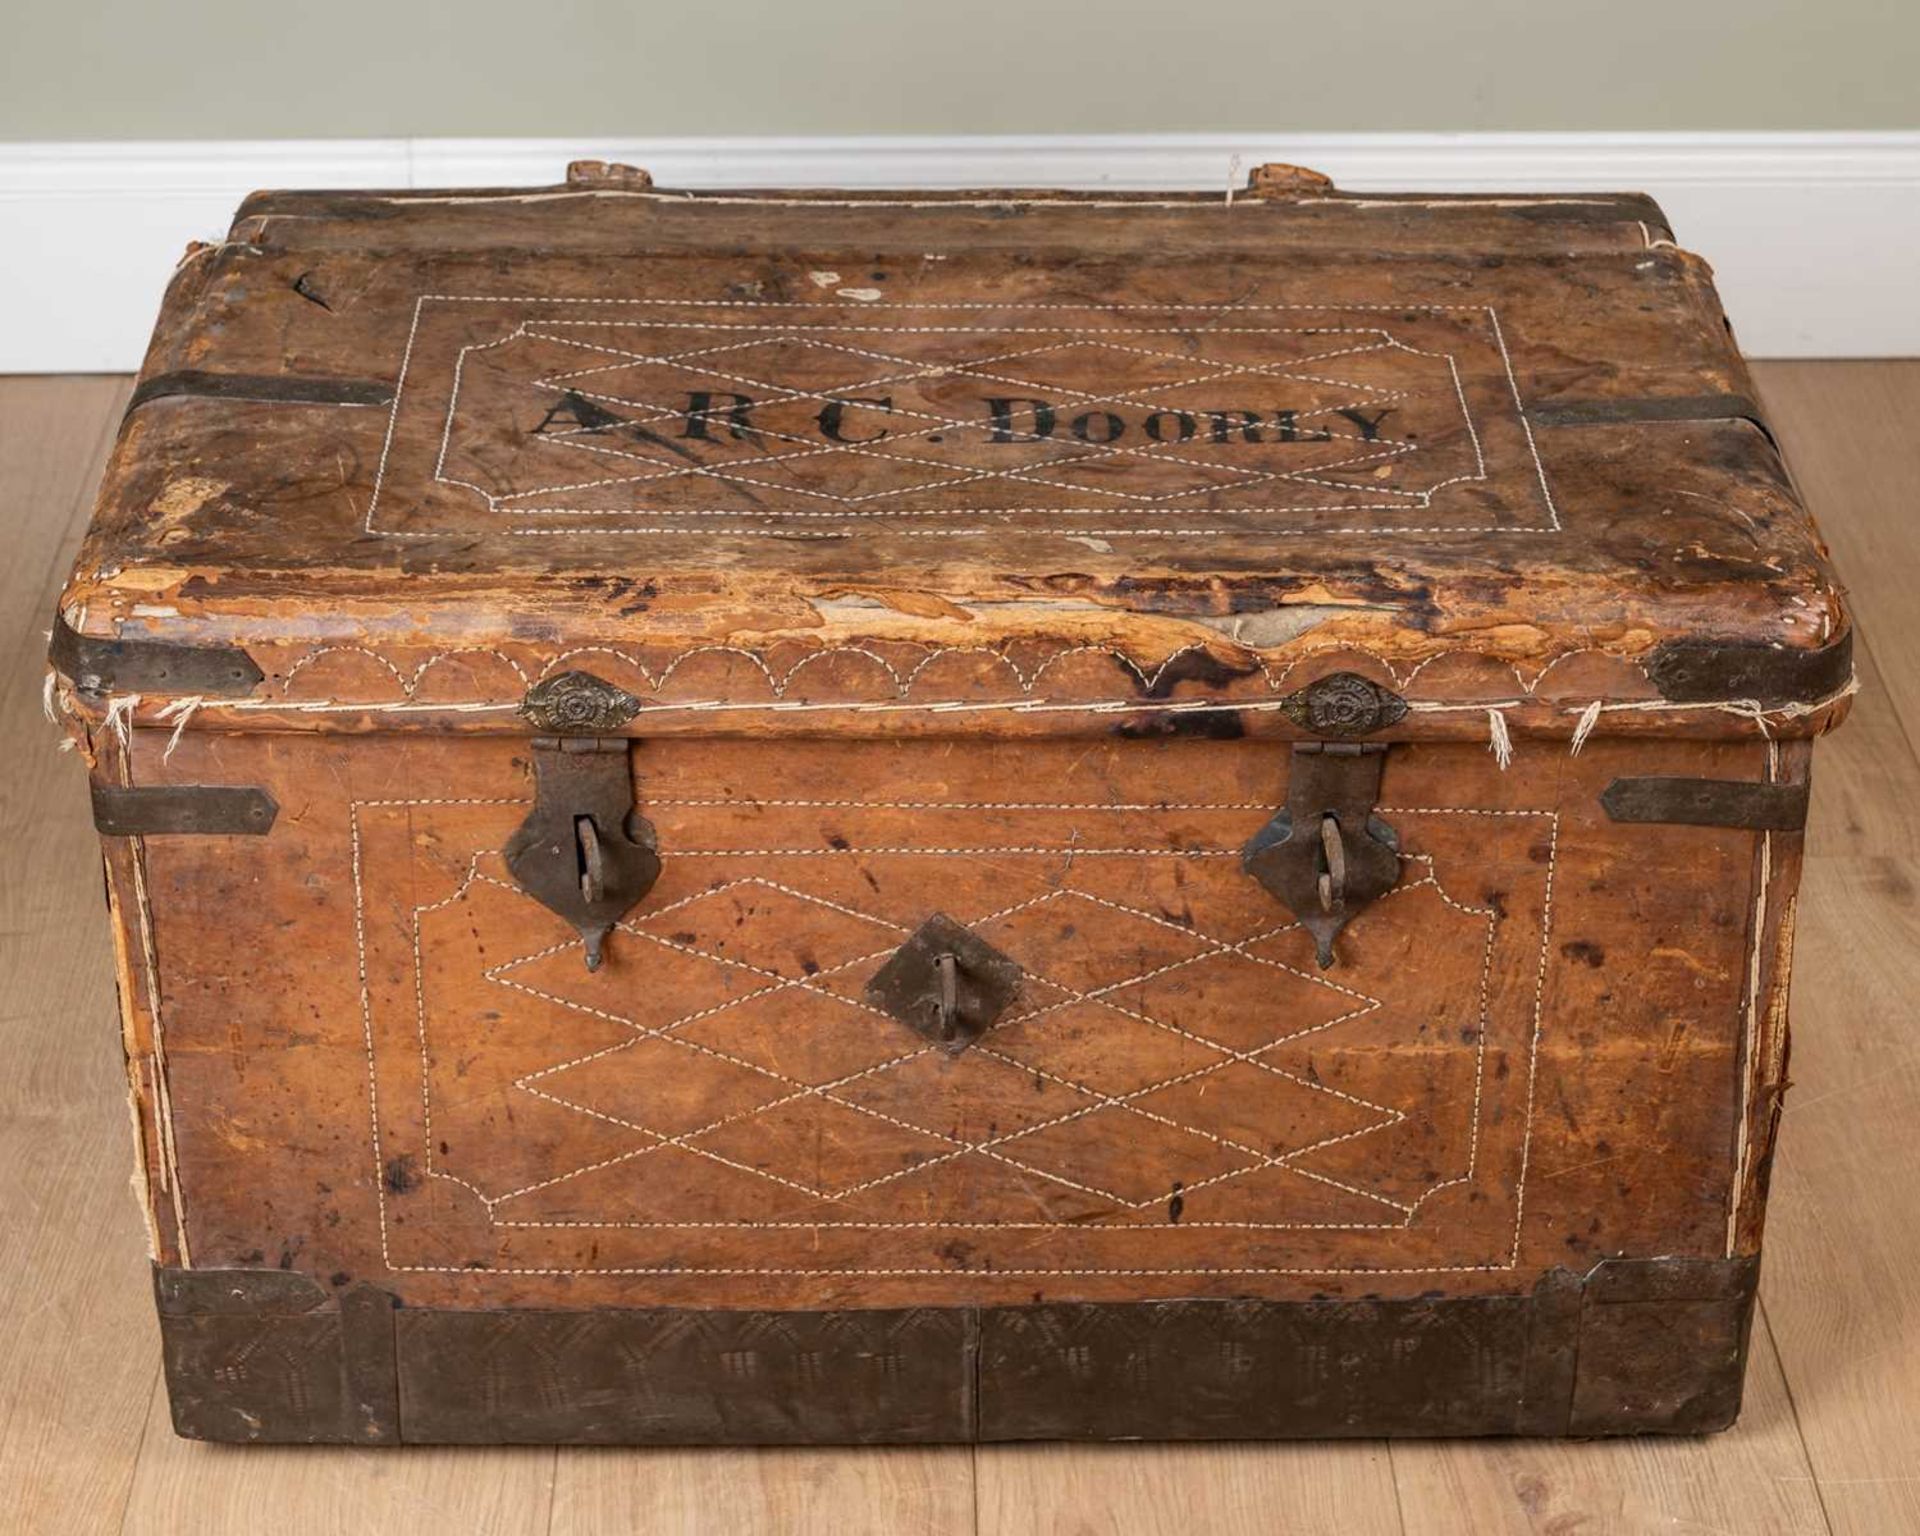 A 19th century leather and iron bound trunk with wrought iron carrying handles to the side and